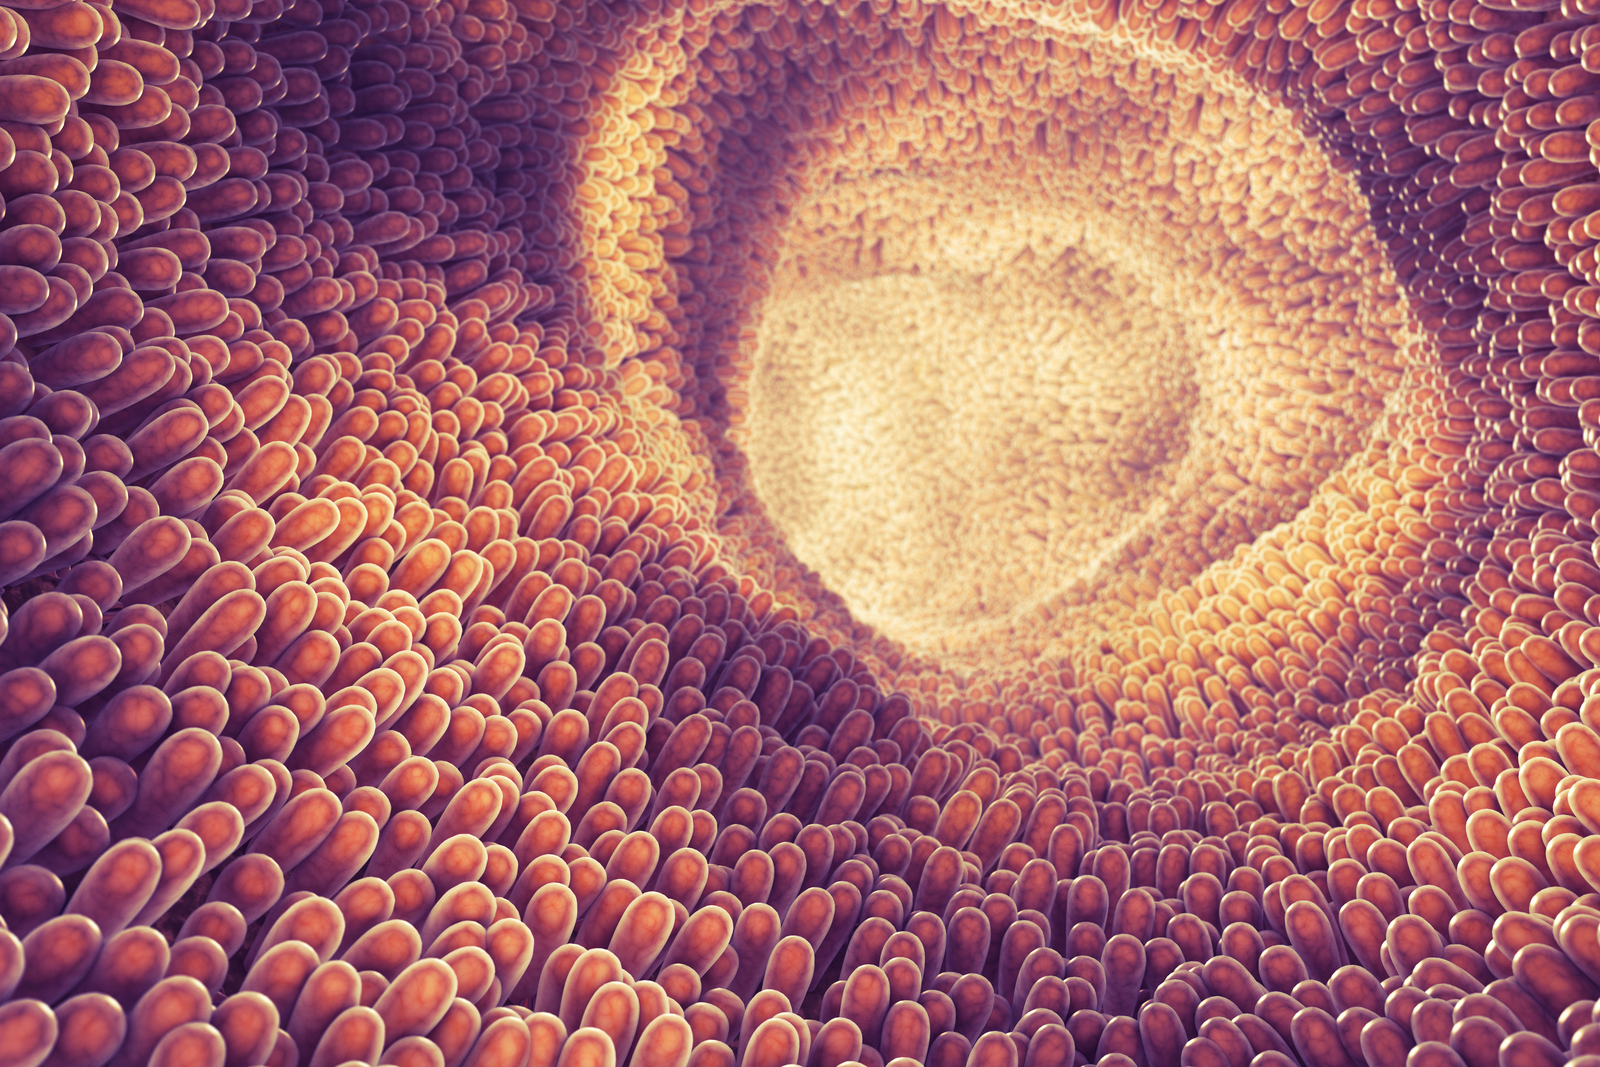 Gut health: Opportunities and challenges. Photo: Shutterstock